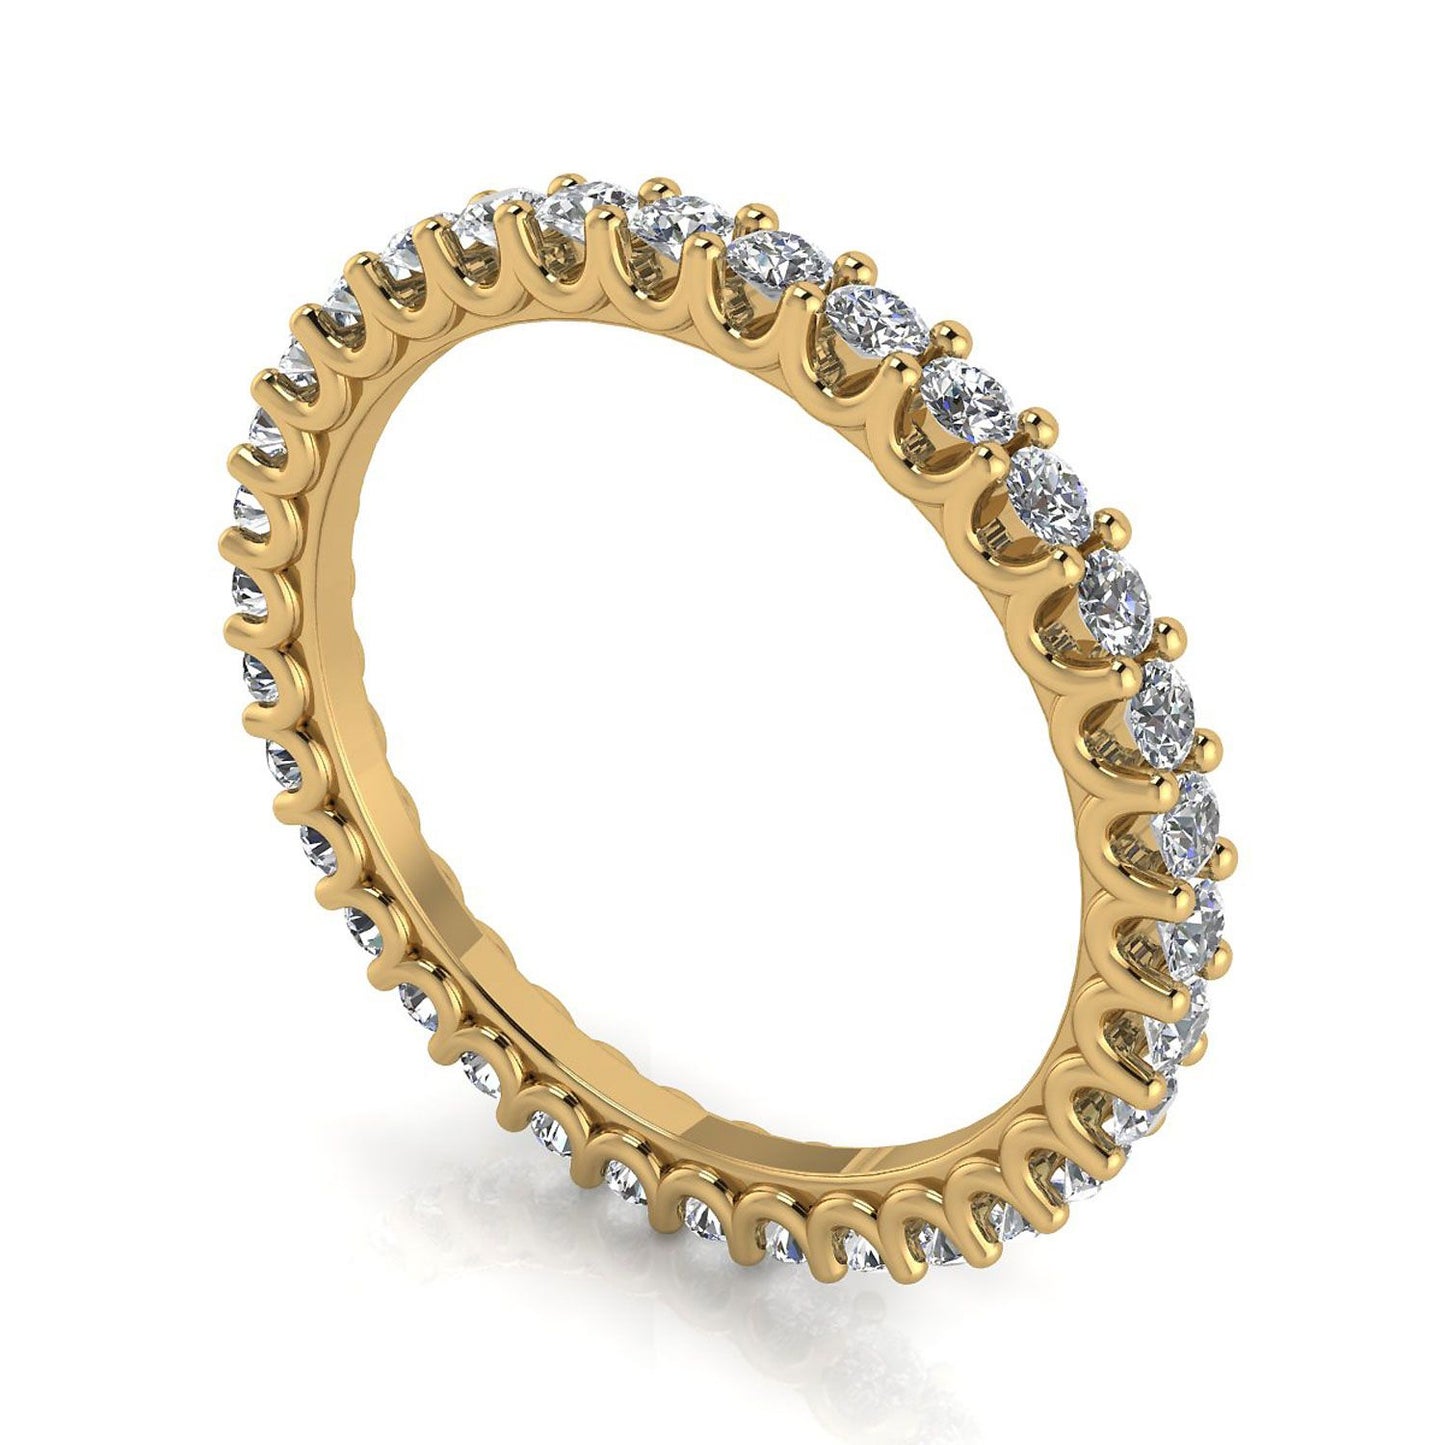 Round Brilliant Cut Diamond Shared Prong Set Eternity Ring In 18k Yellow Gold  (1.62ct. Tw.) Ring Size 8